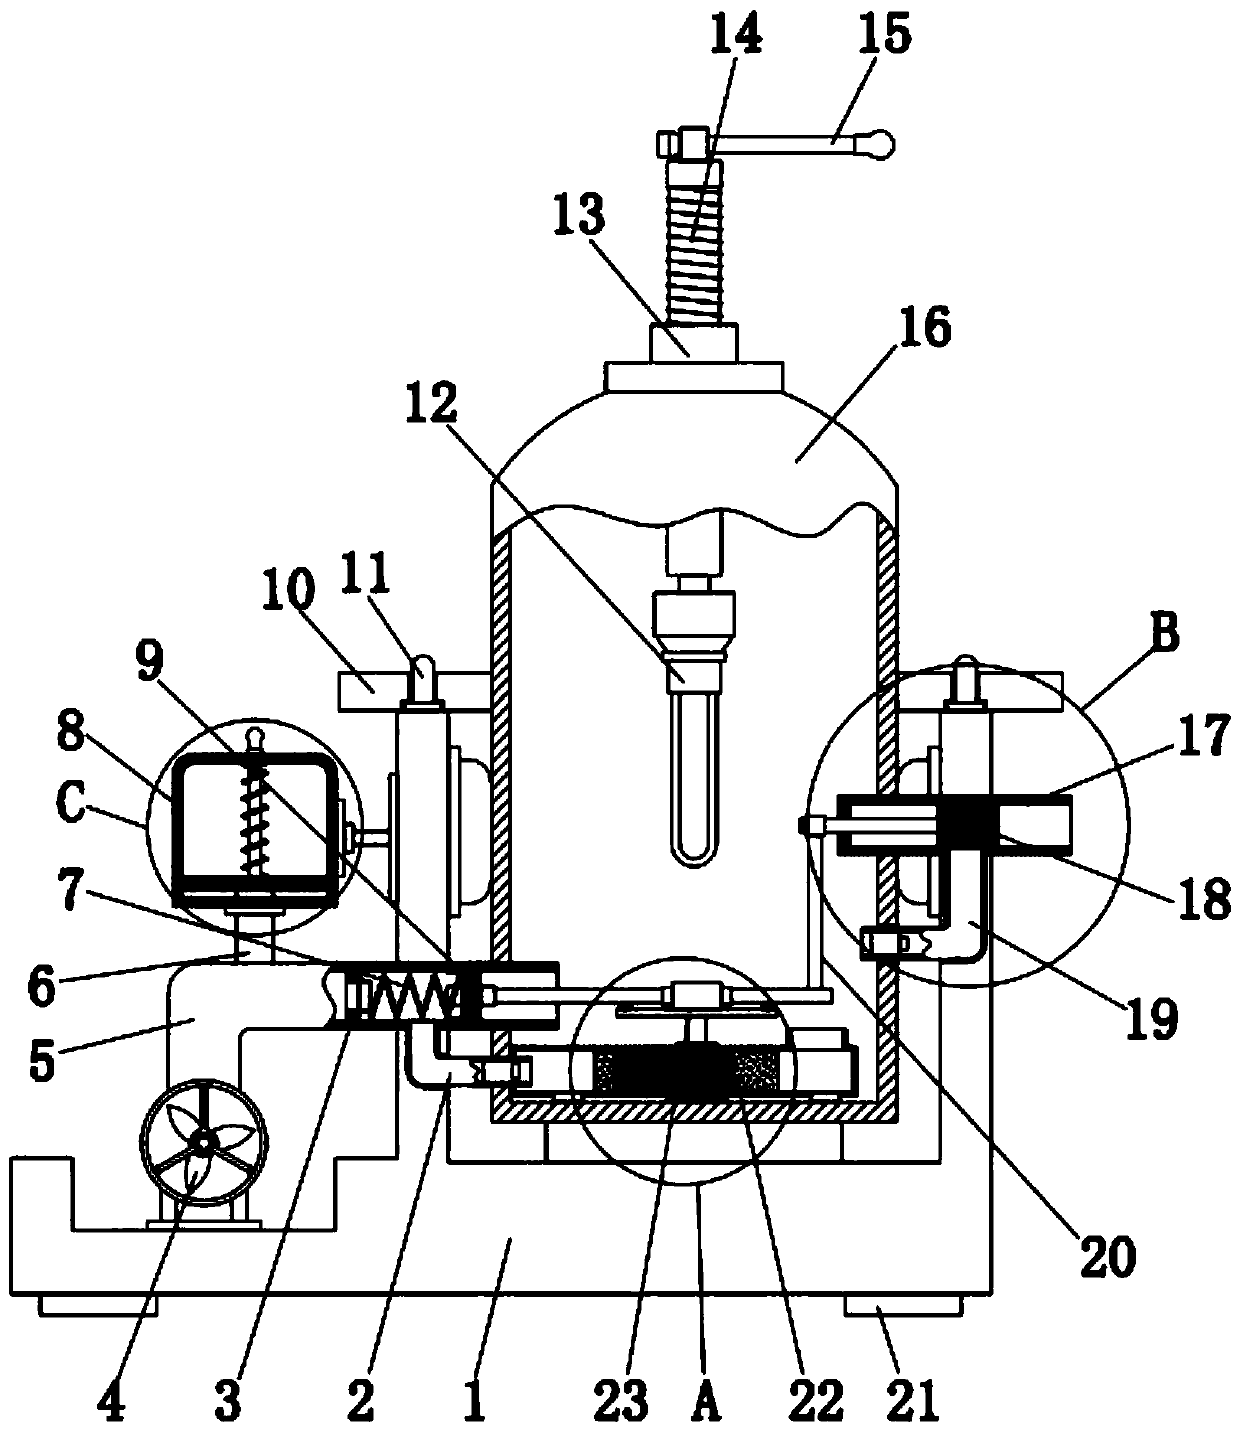 Anesthetic waste gas extraction device for anesthesia departments